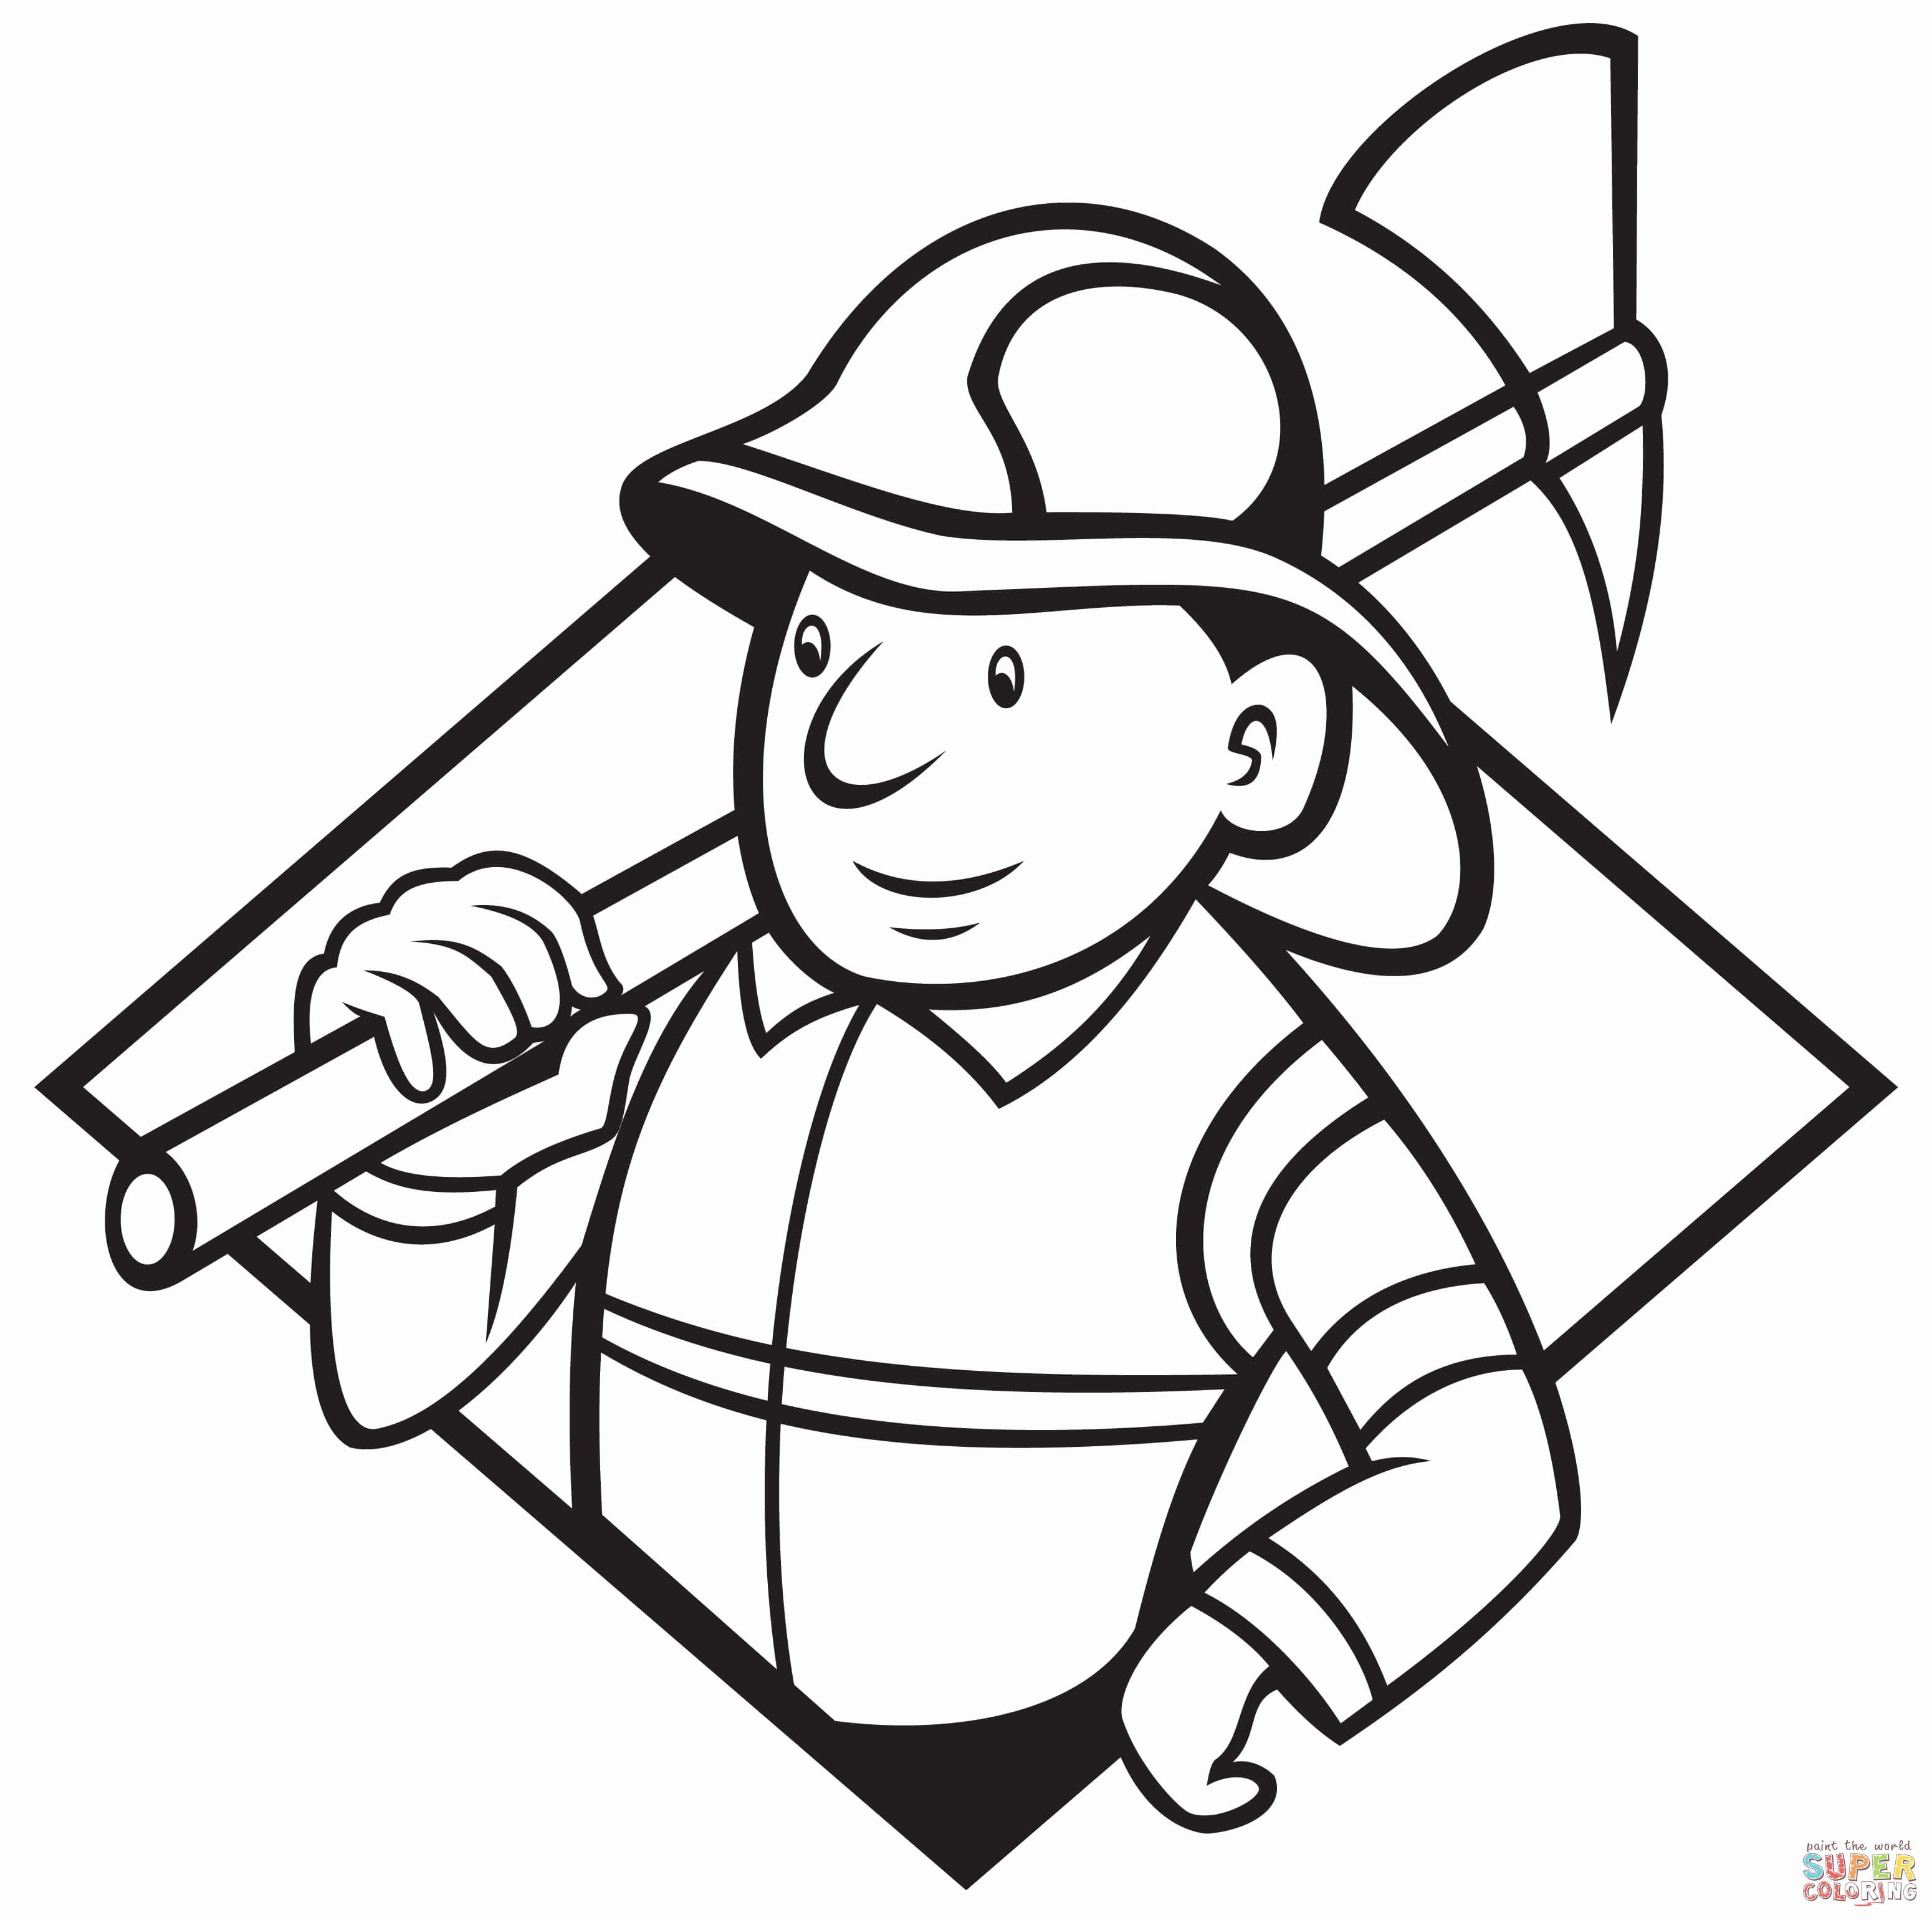 25 Fire Fighter Coloring Pages A Fire Fighter Coloring